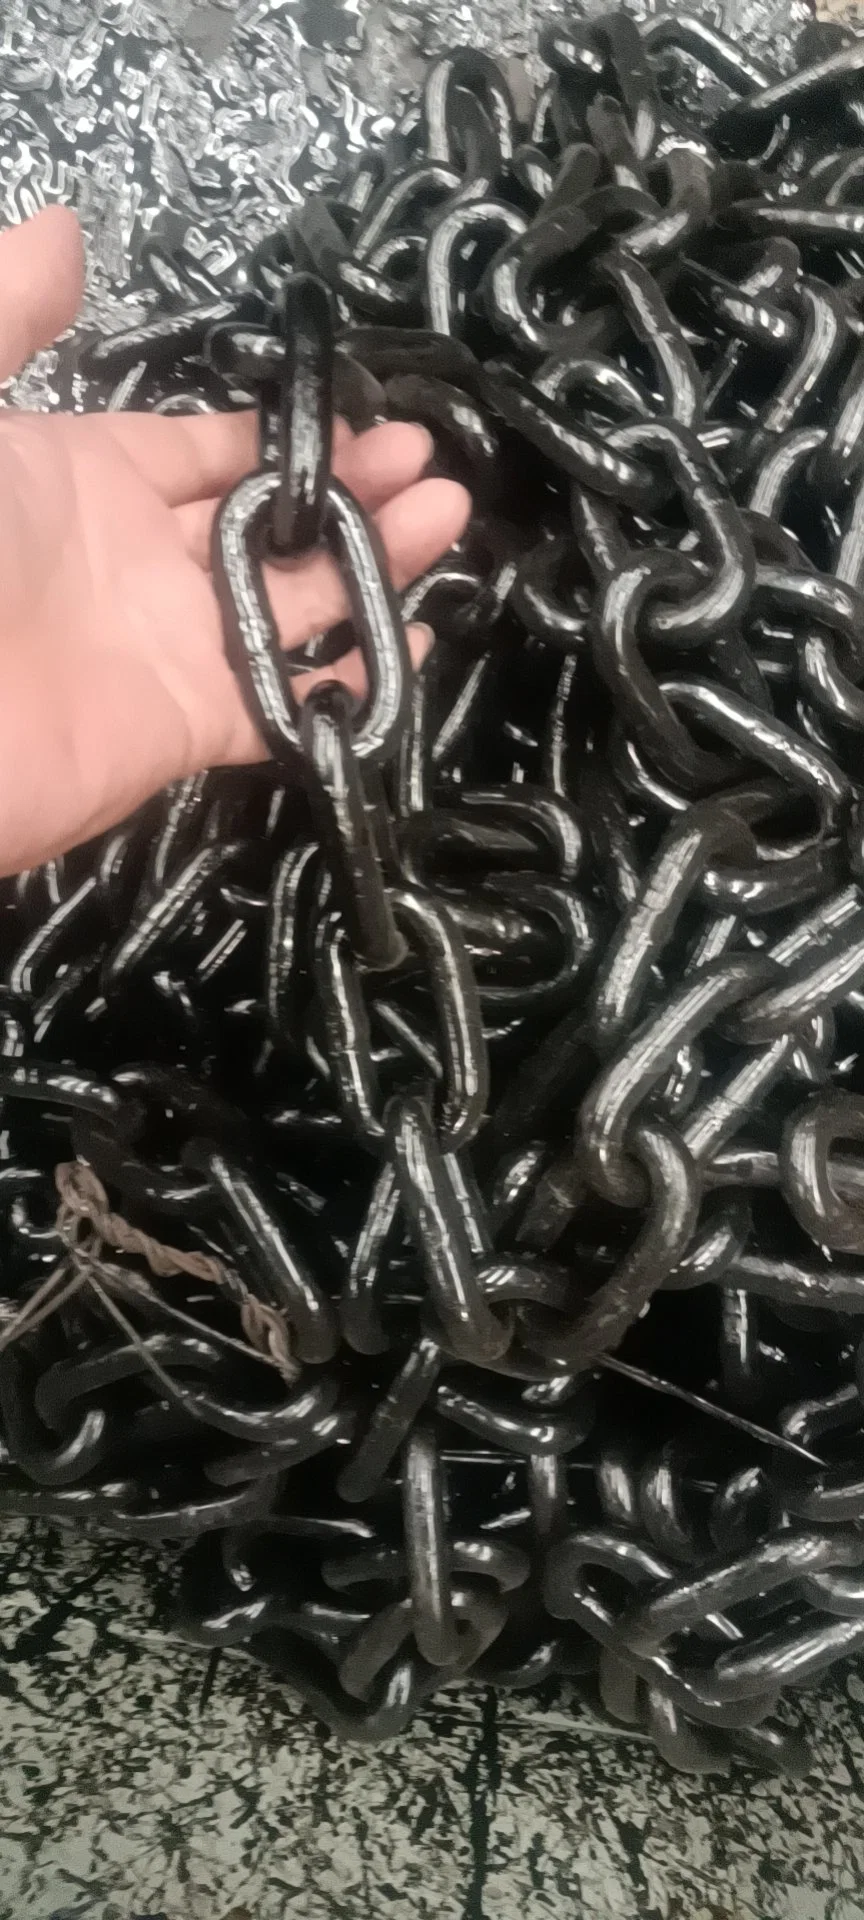 Studless Link Marine Anchor Chain